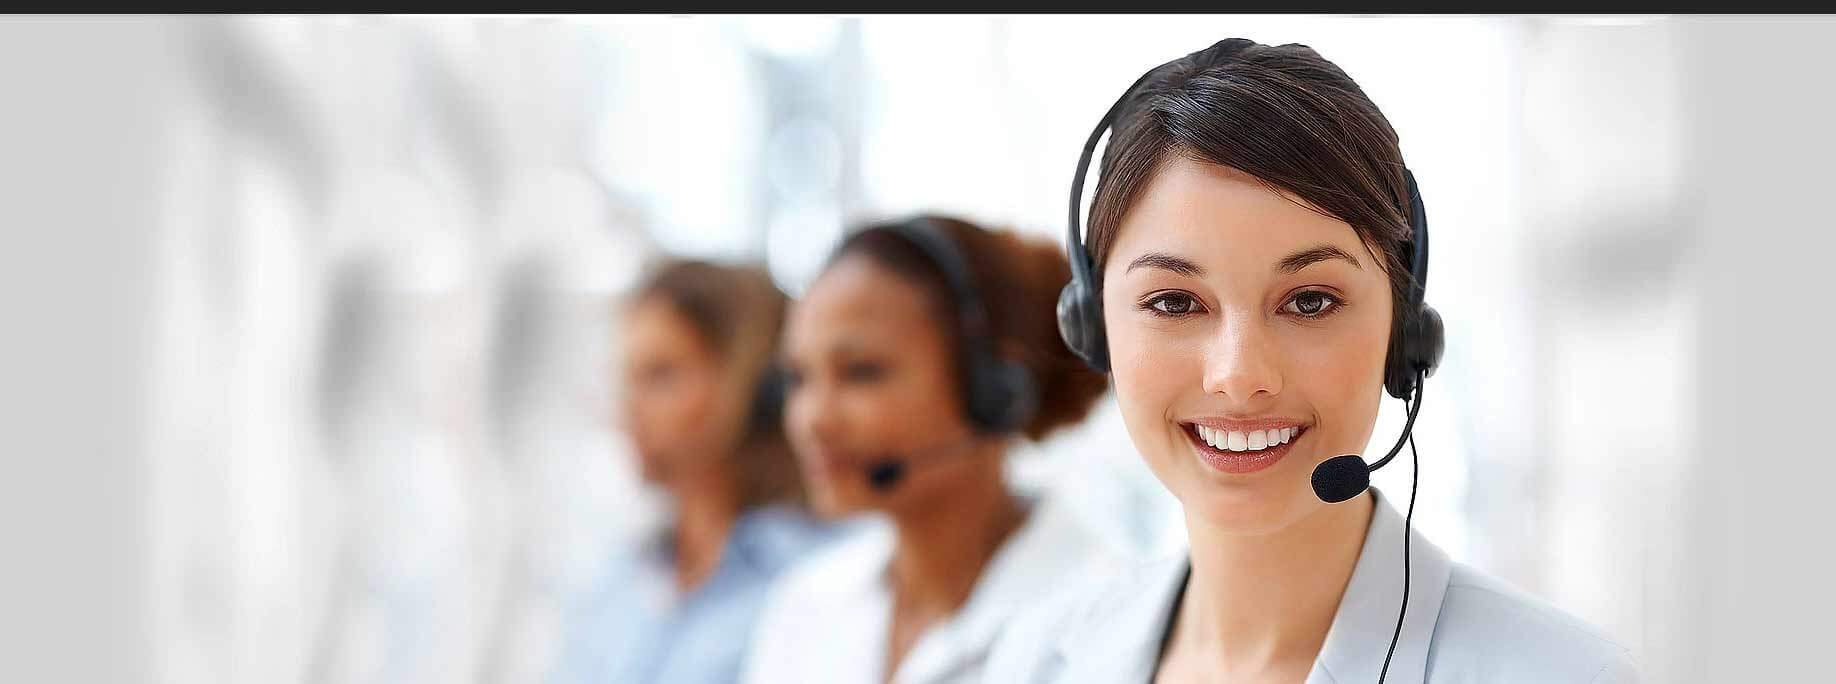 Know about creating a call center security policy